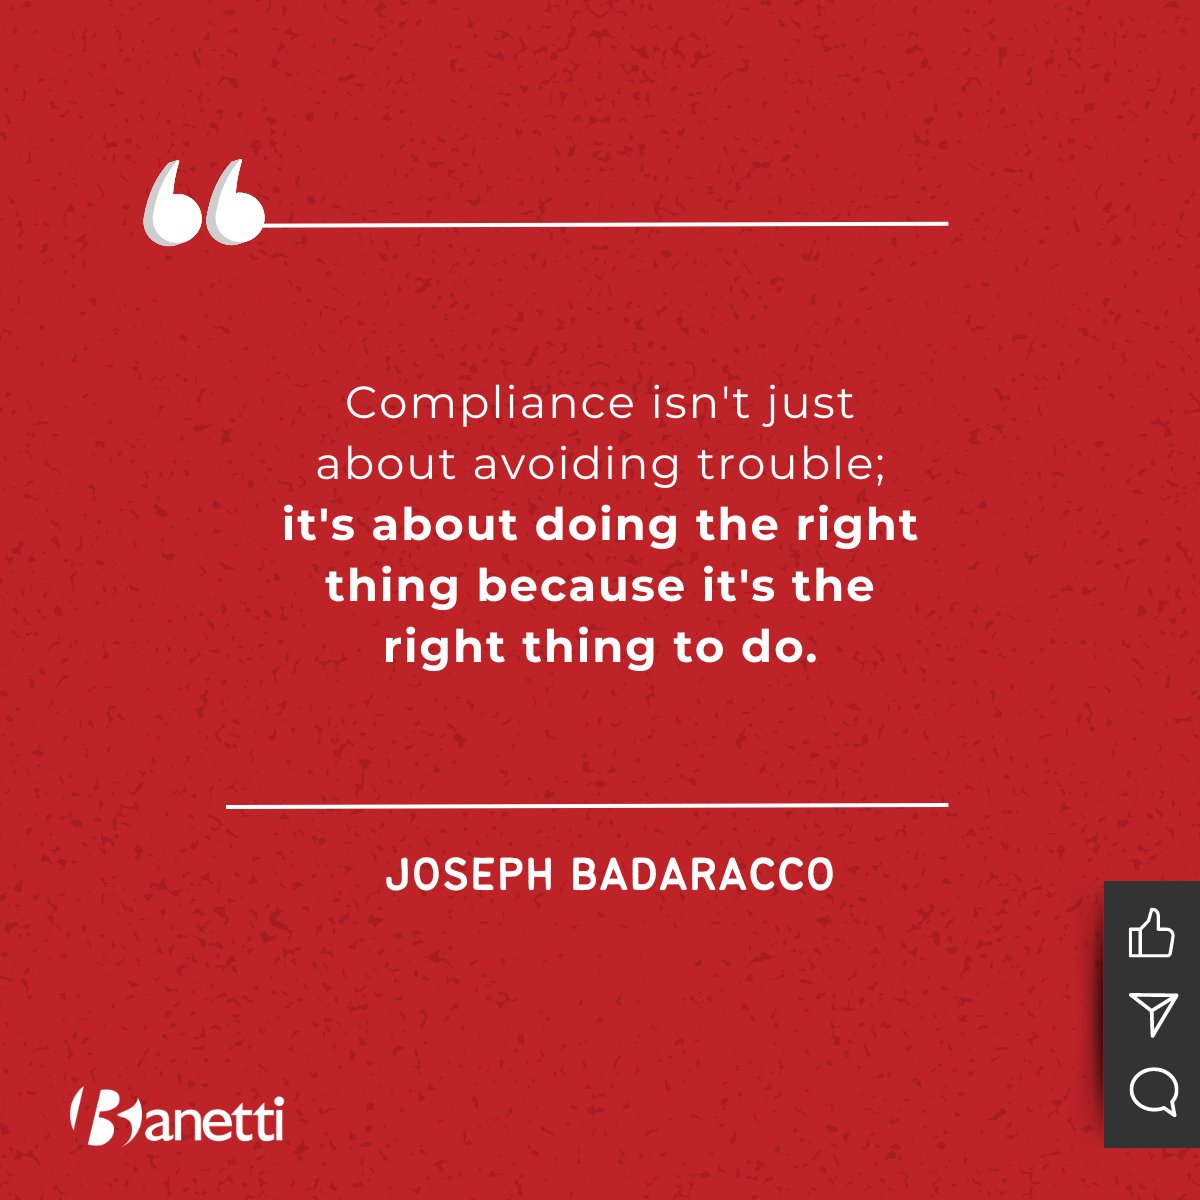 Let's strive for integrity in every action we take.

#Banetti #IBMMaximo #assetmanagement #EAM #assetmaintenance #compliance #regulations